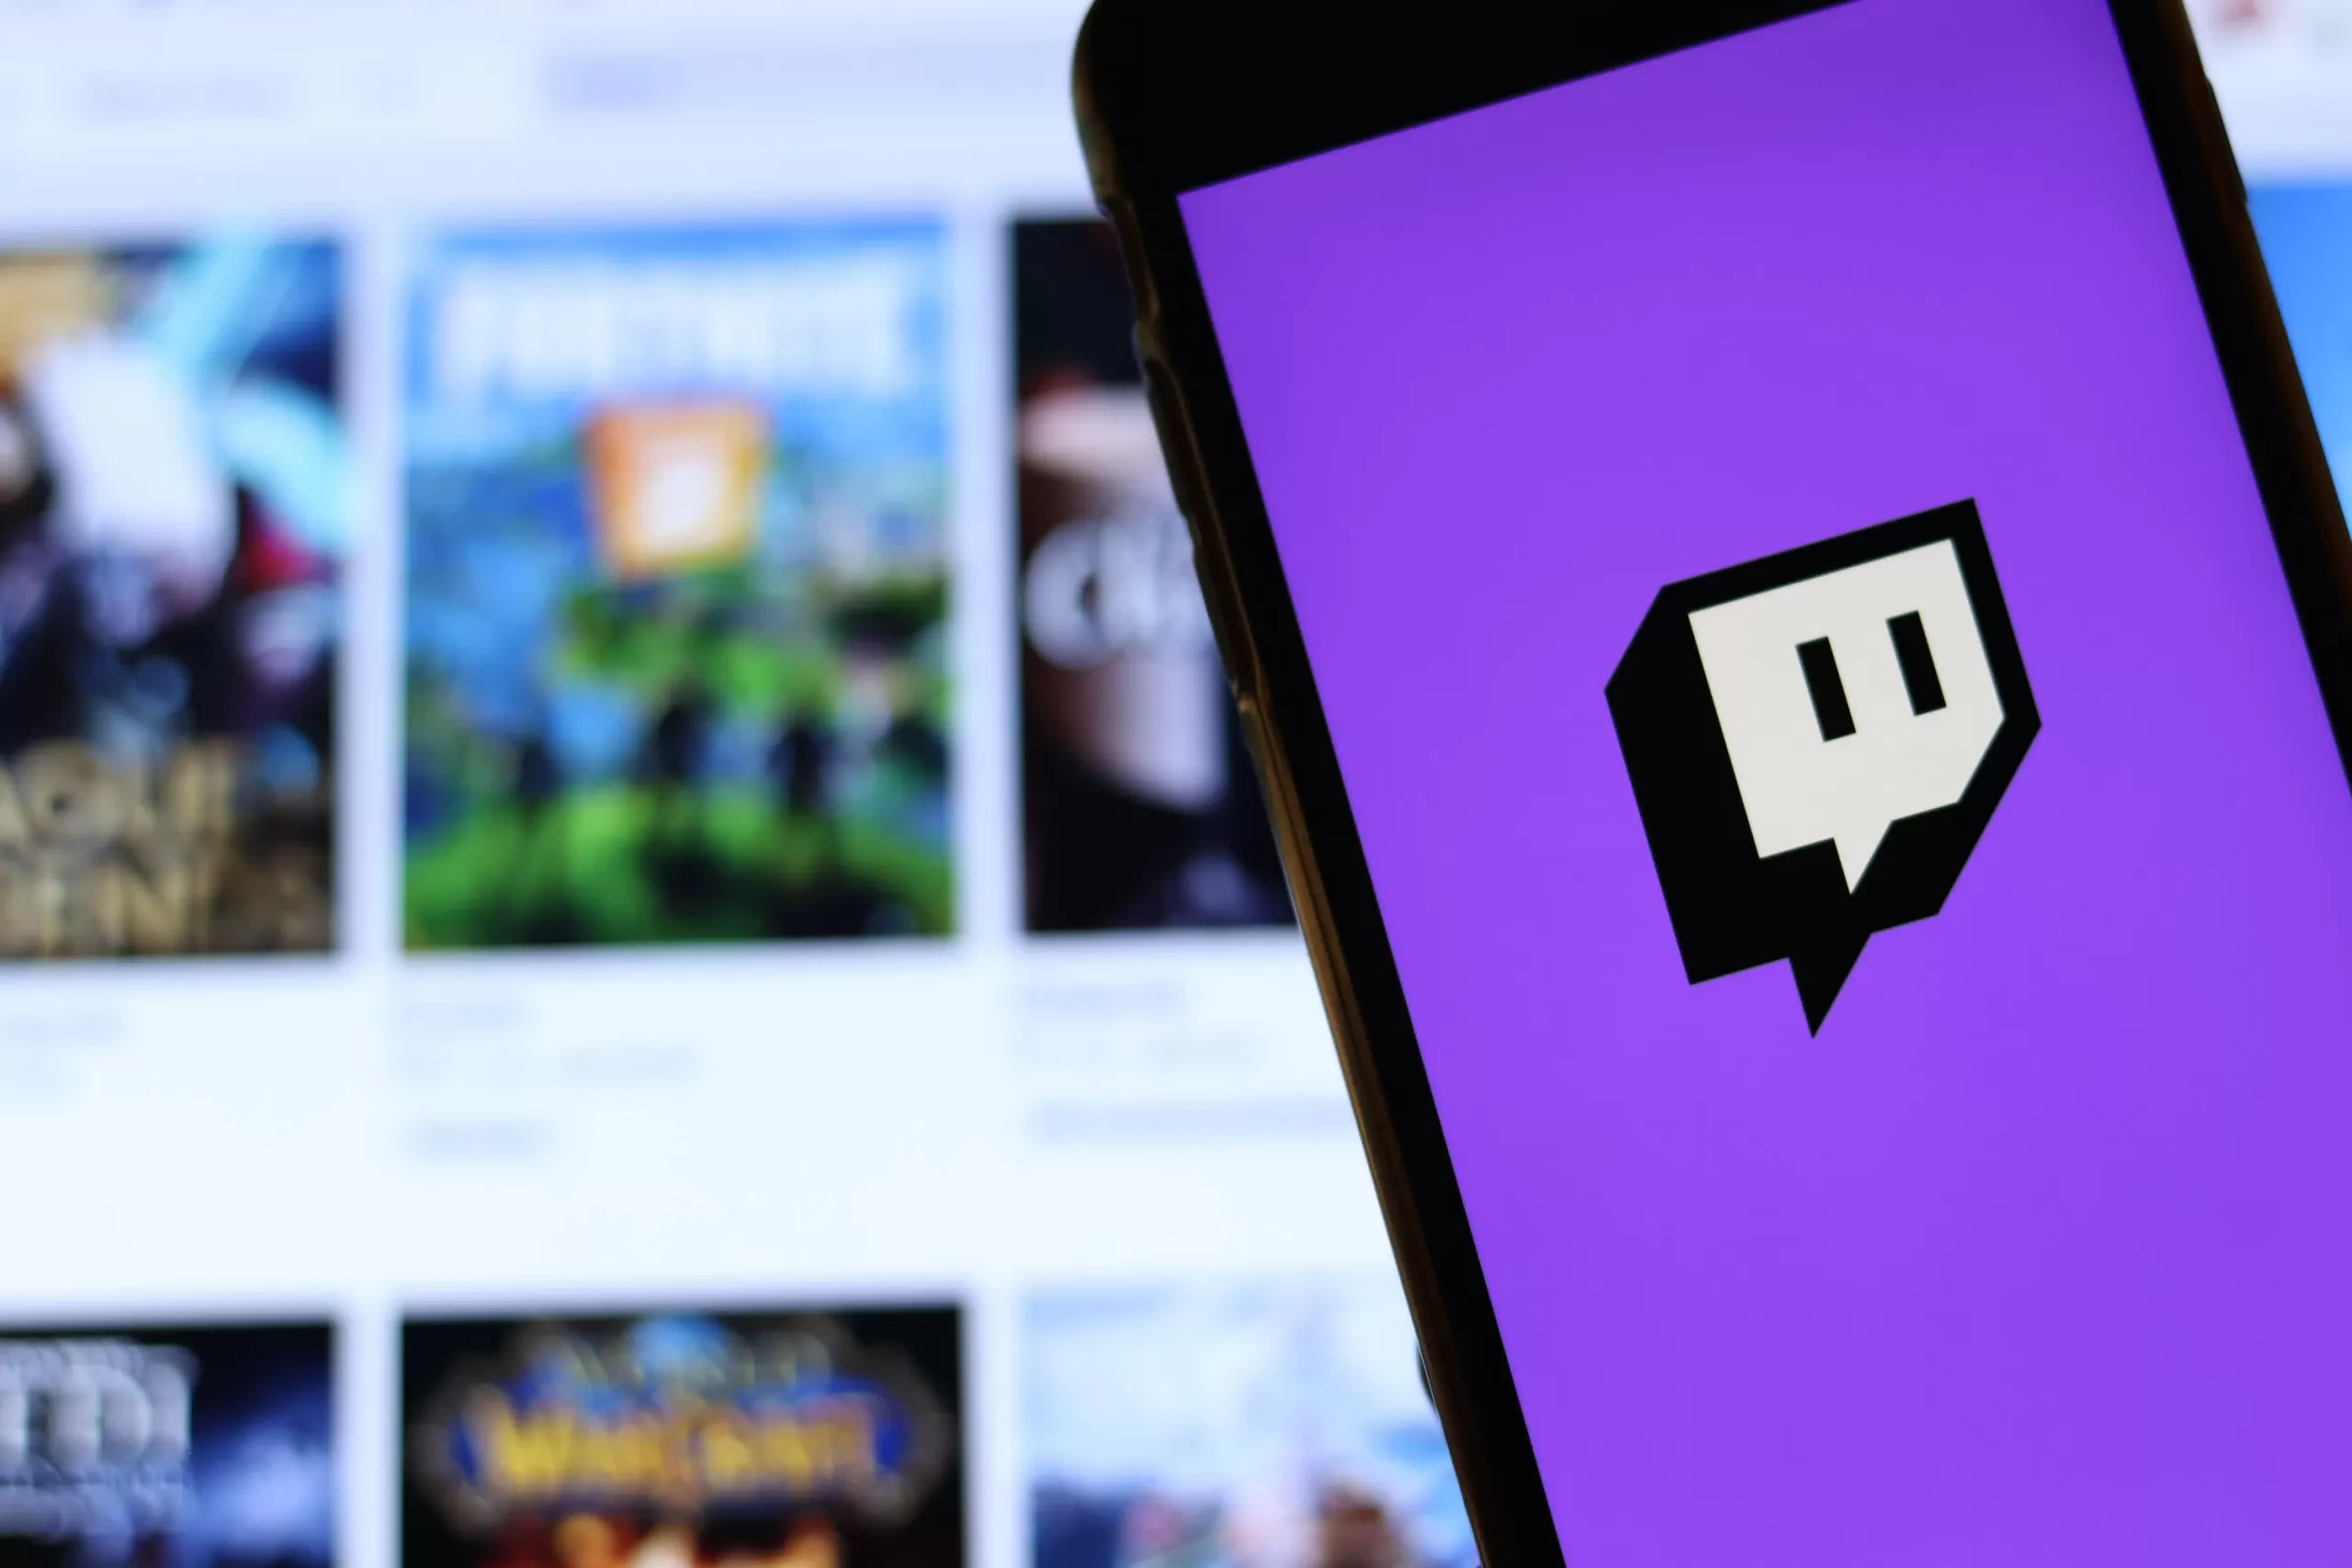 Twitch's Soundtrack app lets streamers play background music without getting a copyright strike